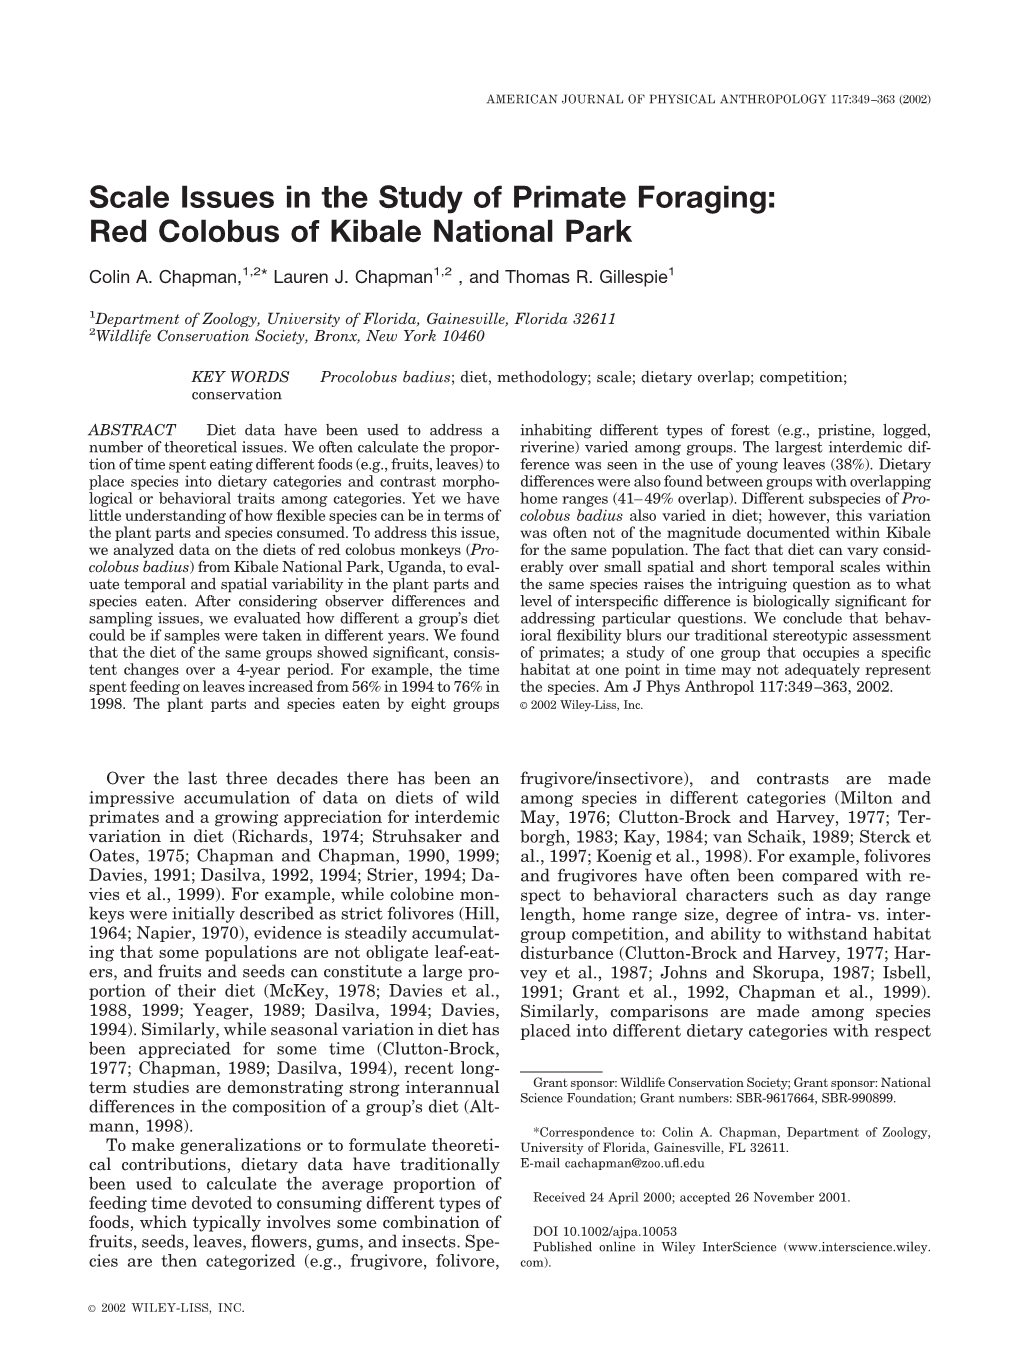 Scale Issues in the Study of Primate Foraging: Red Colobus of Kibale National Park